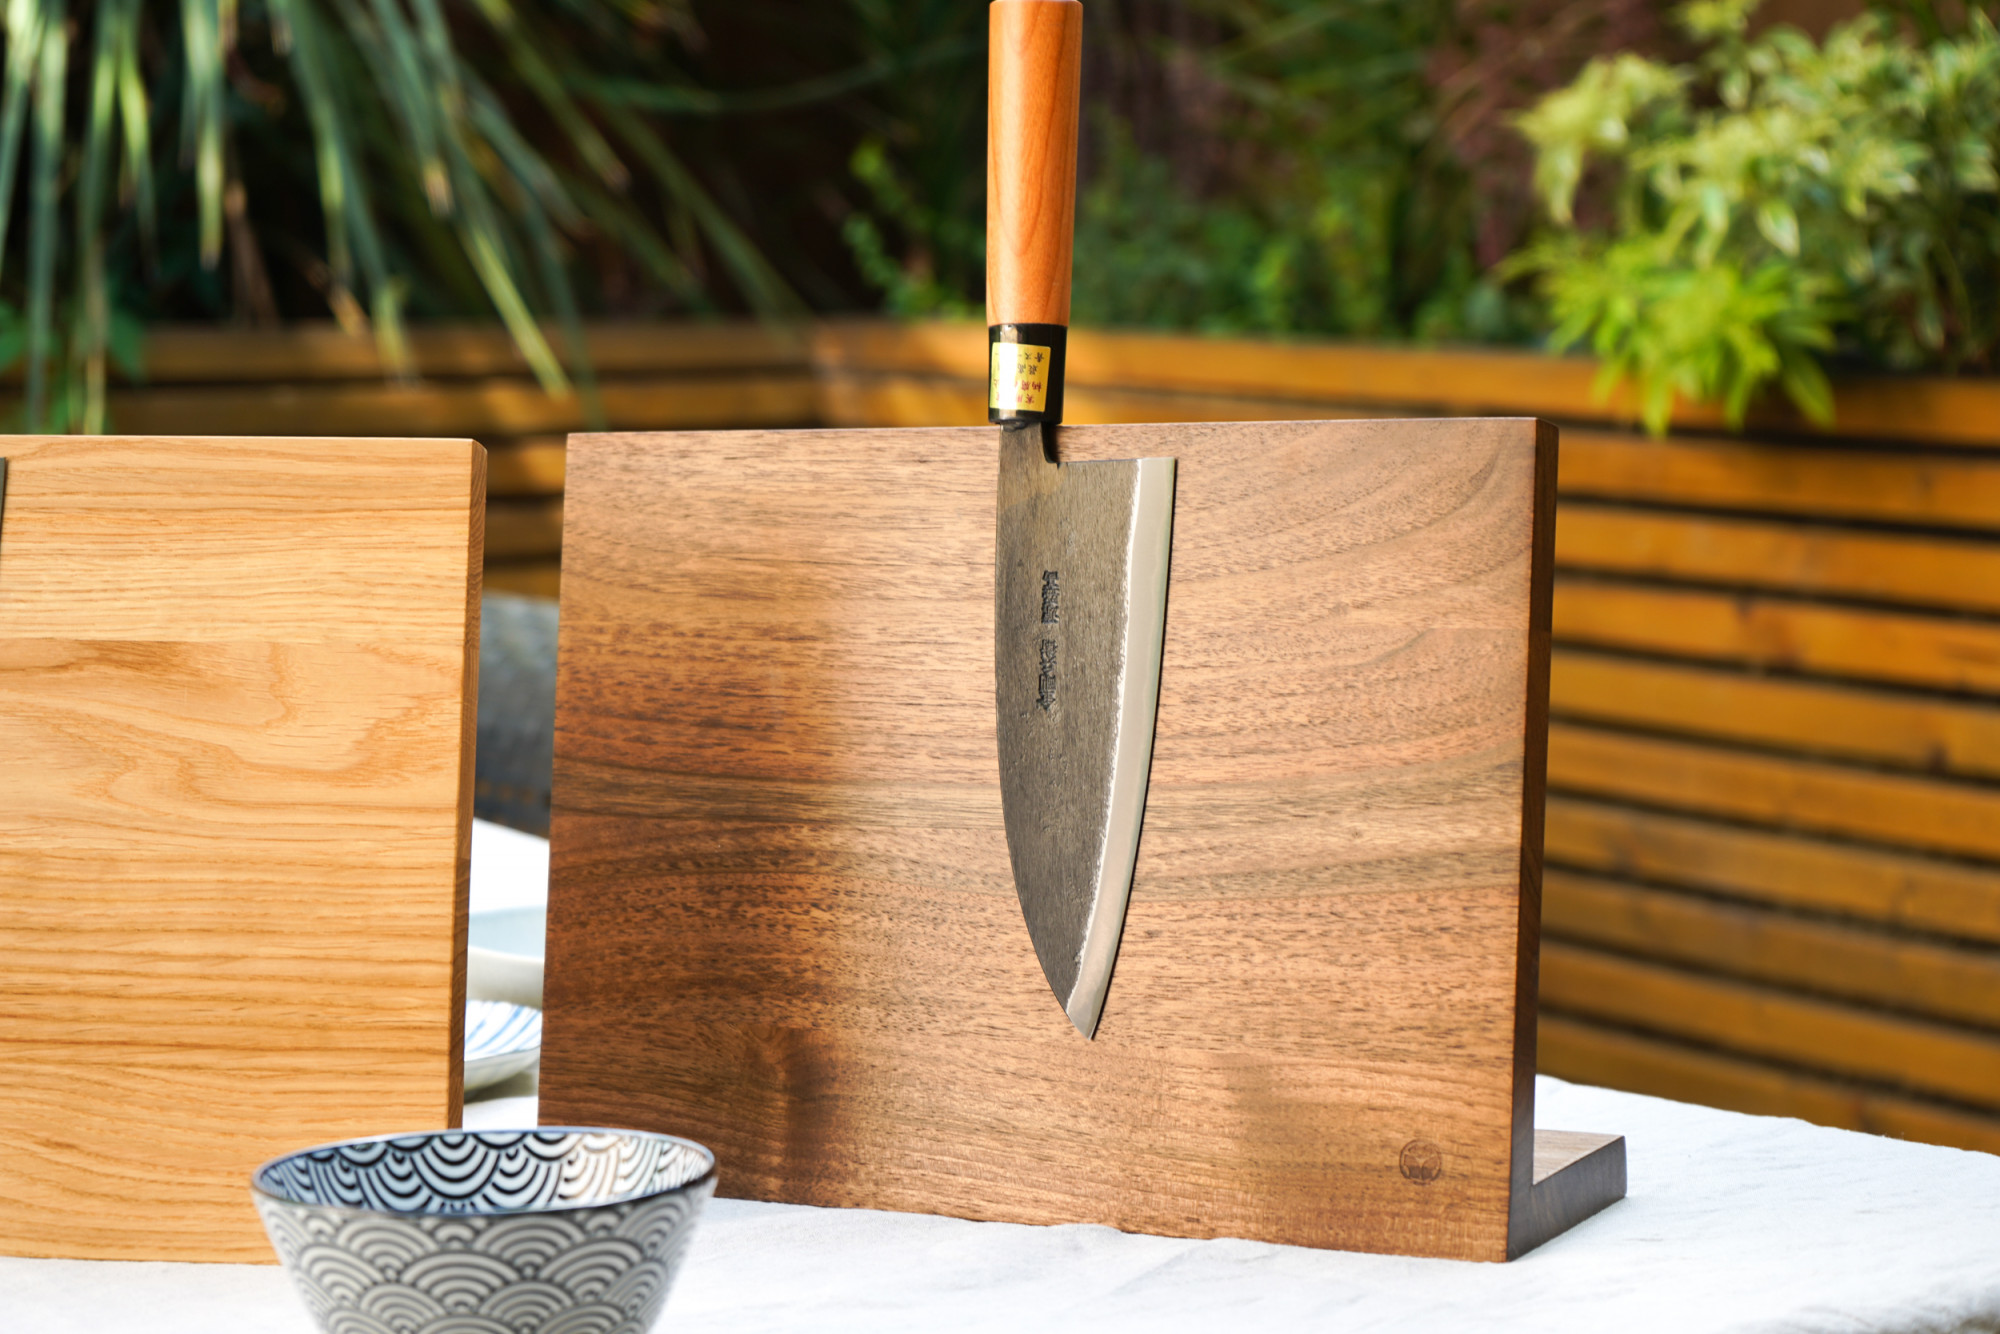 Moritaka Deba 180mm AS featuring our signature magnetic knife stand in oak